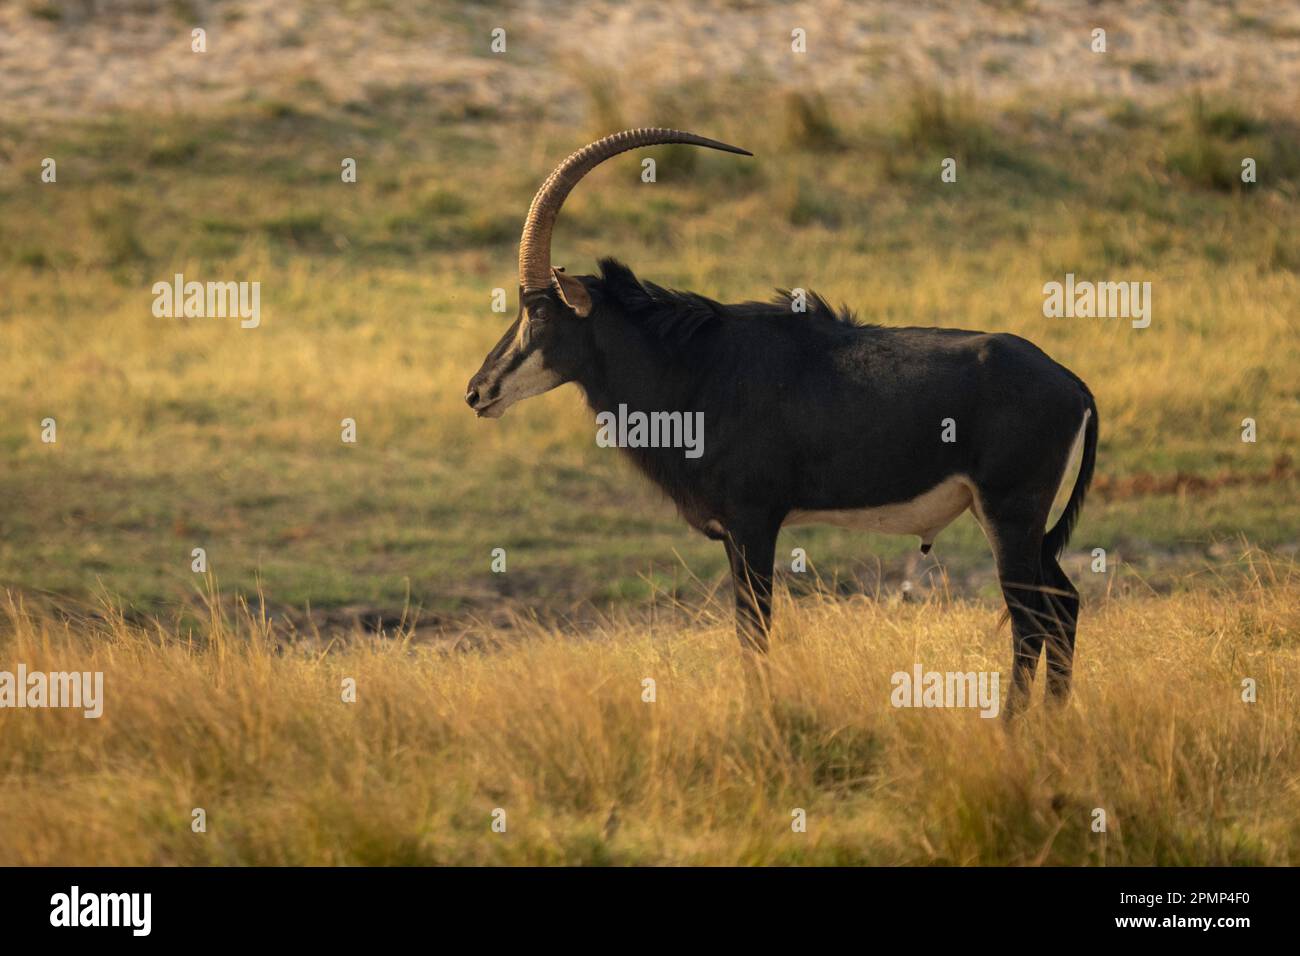 Male Sable antelope (Hippotragus niger) stands staring in profile in Chobe National Park; Chobe, Botswana Stock Photo